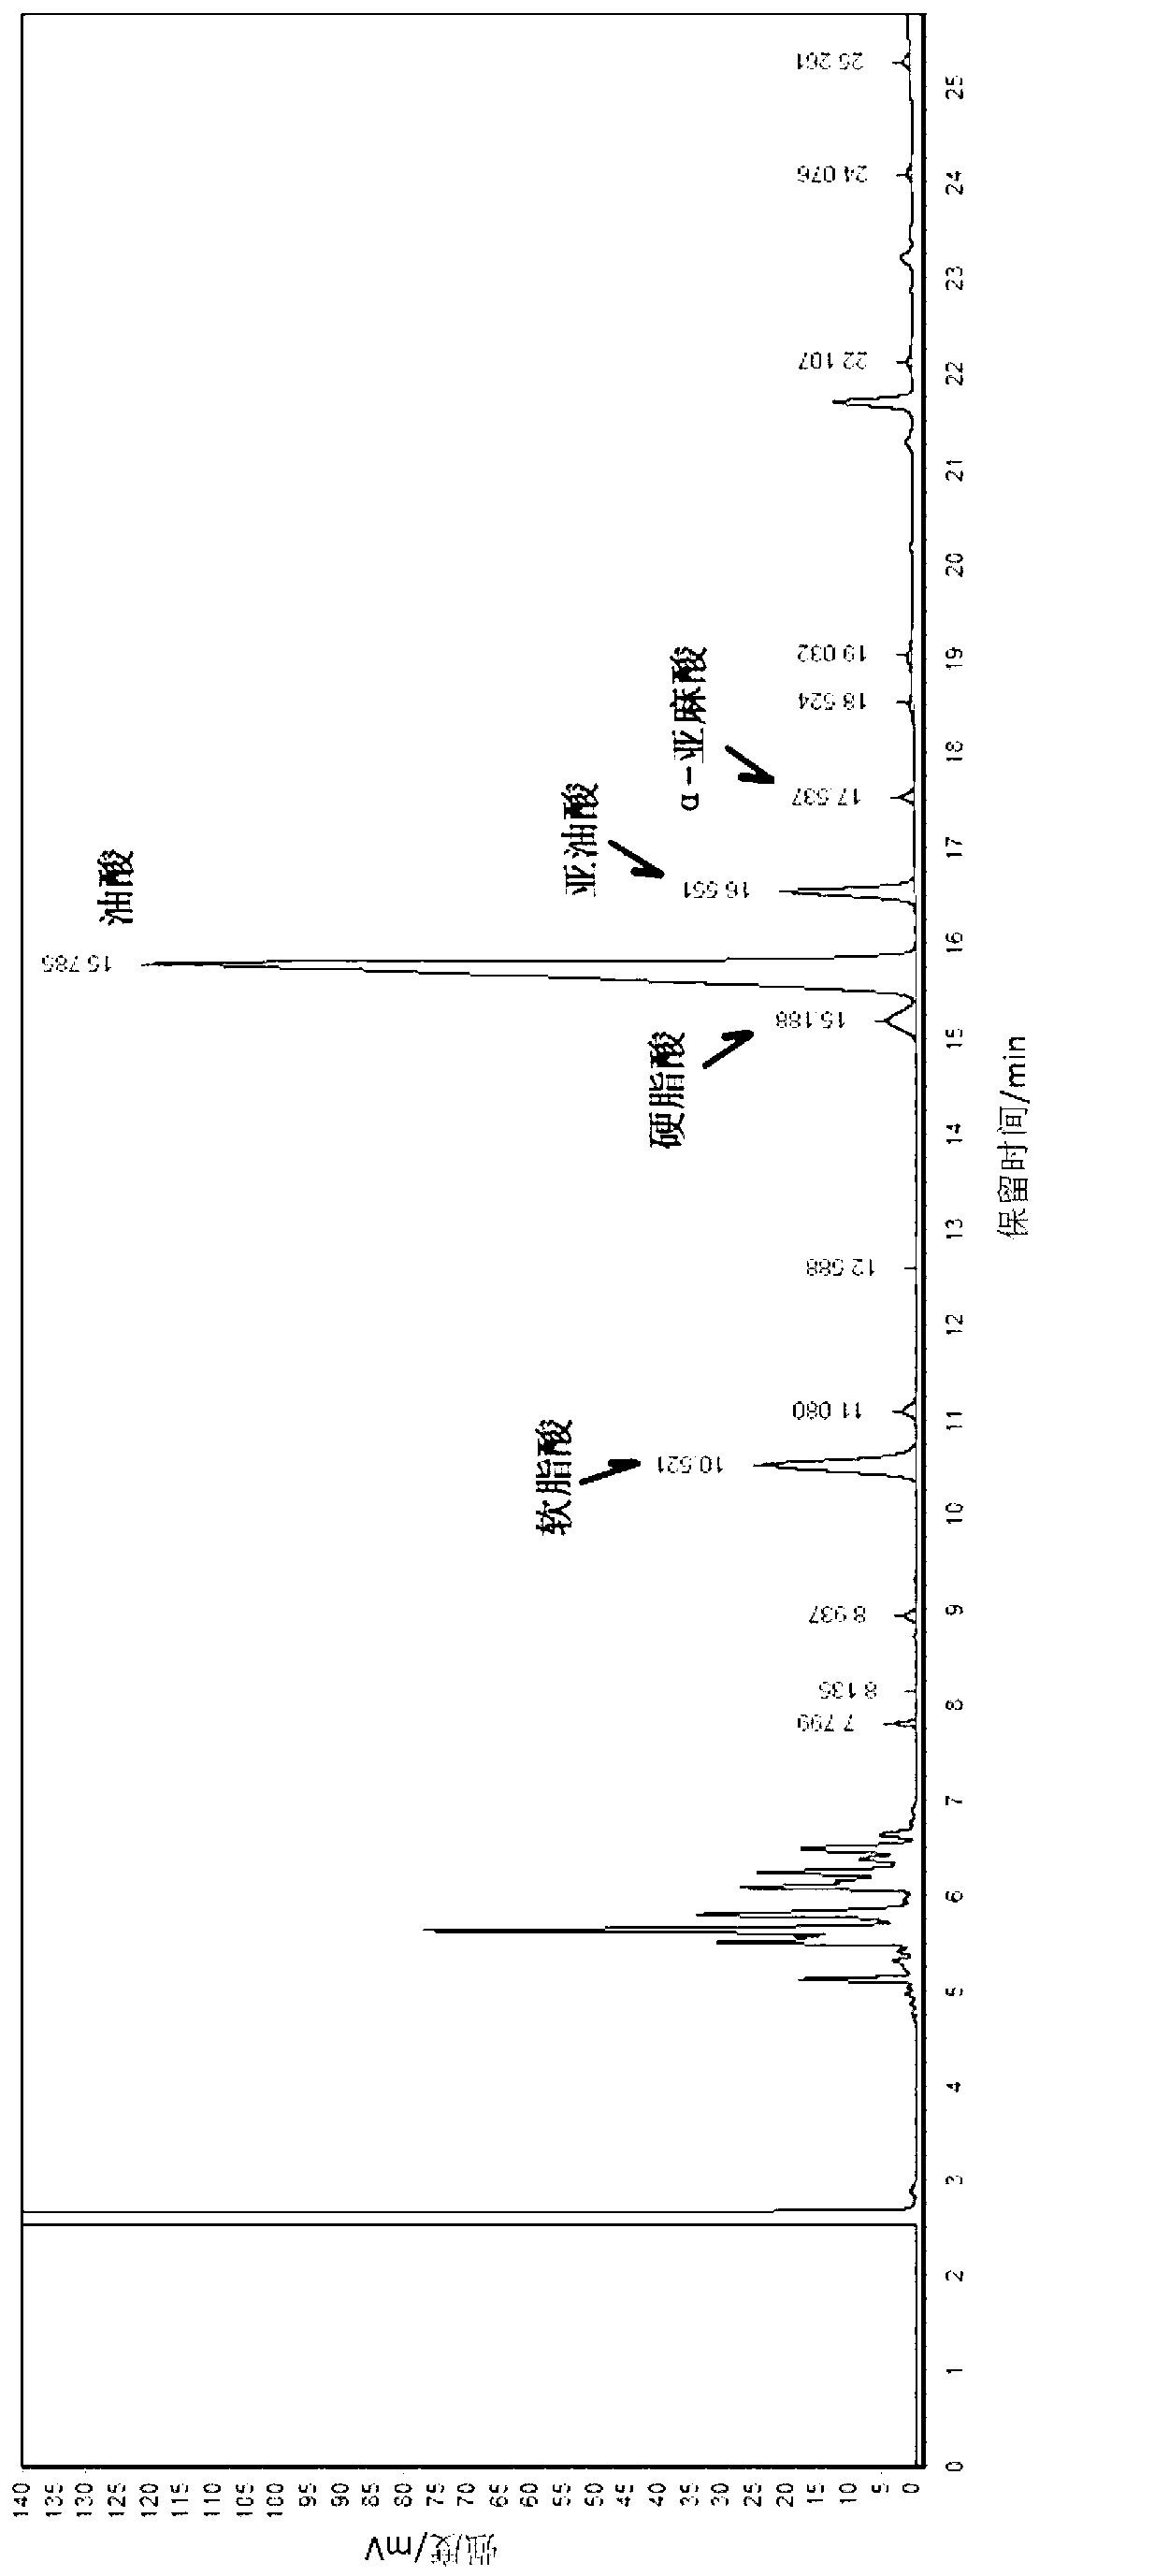 Raman-spectrum-based method for detecting content of oleic acid, linoleic acid and saturated fatty acid in edible vegetable oil